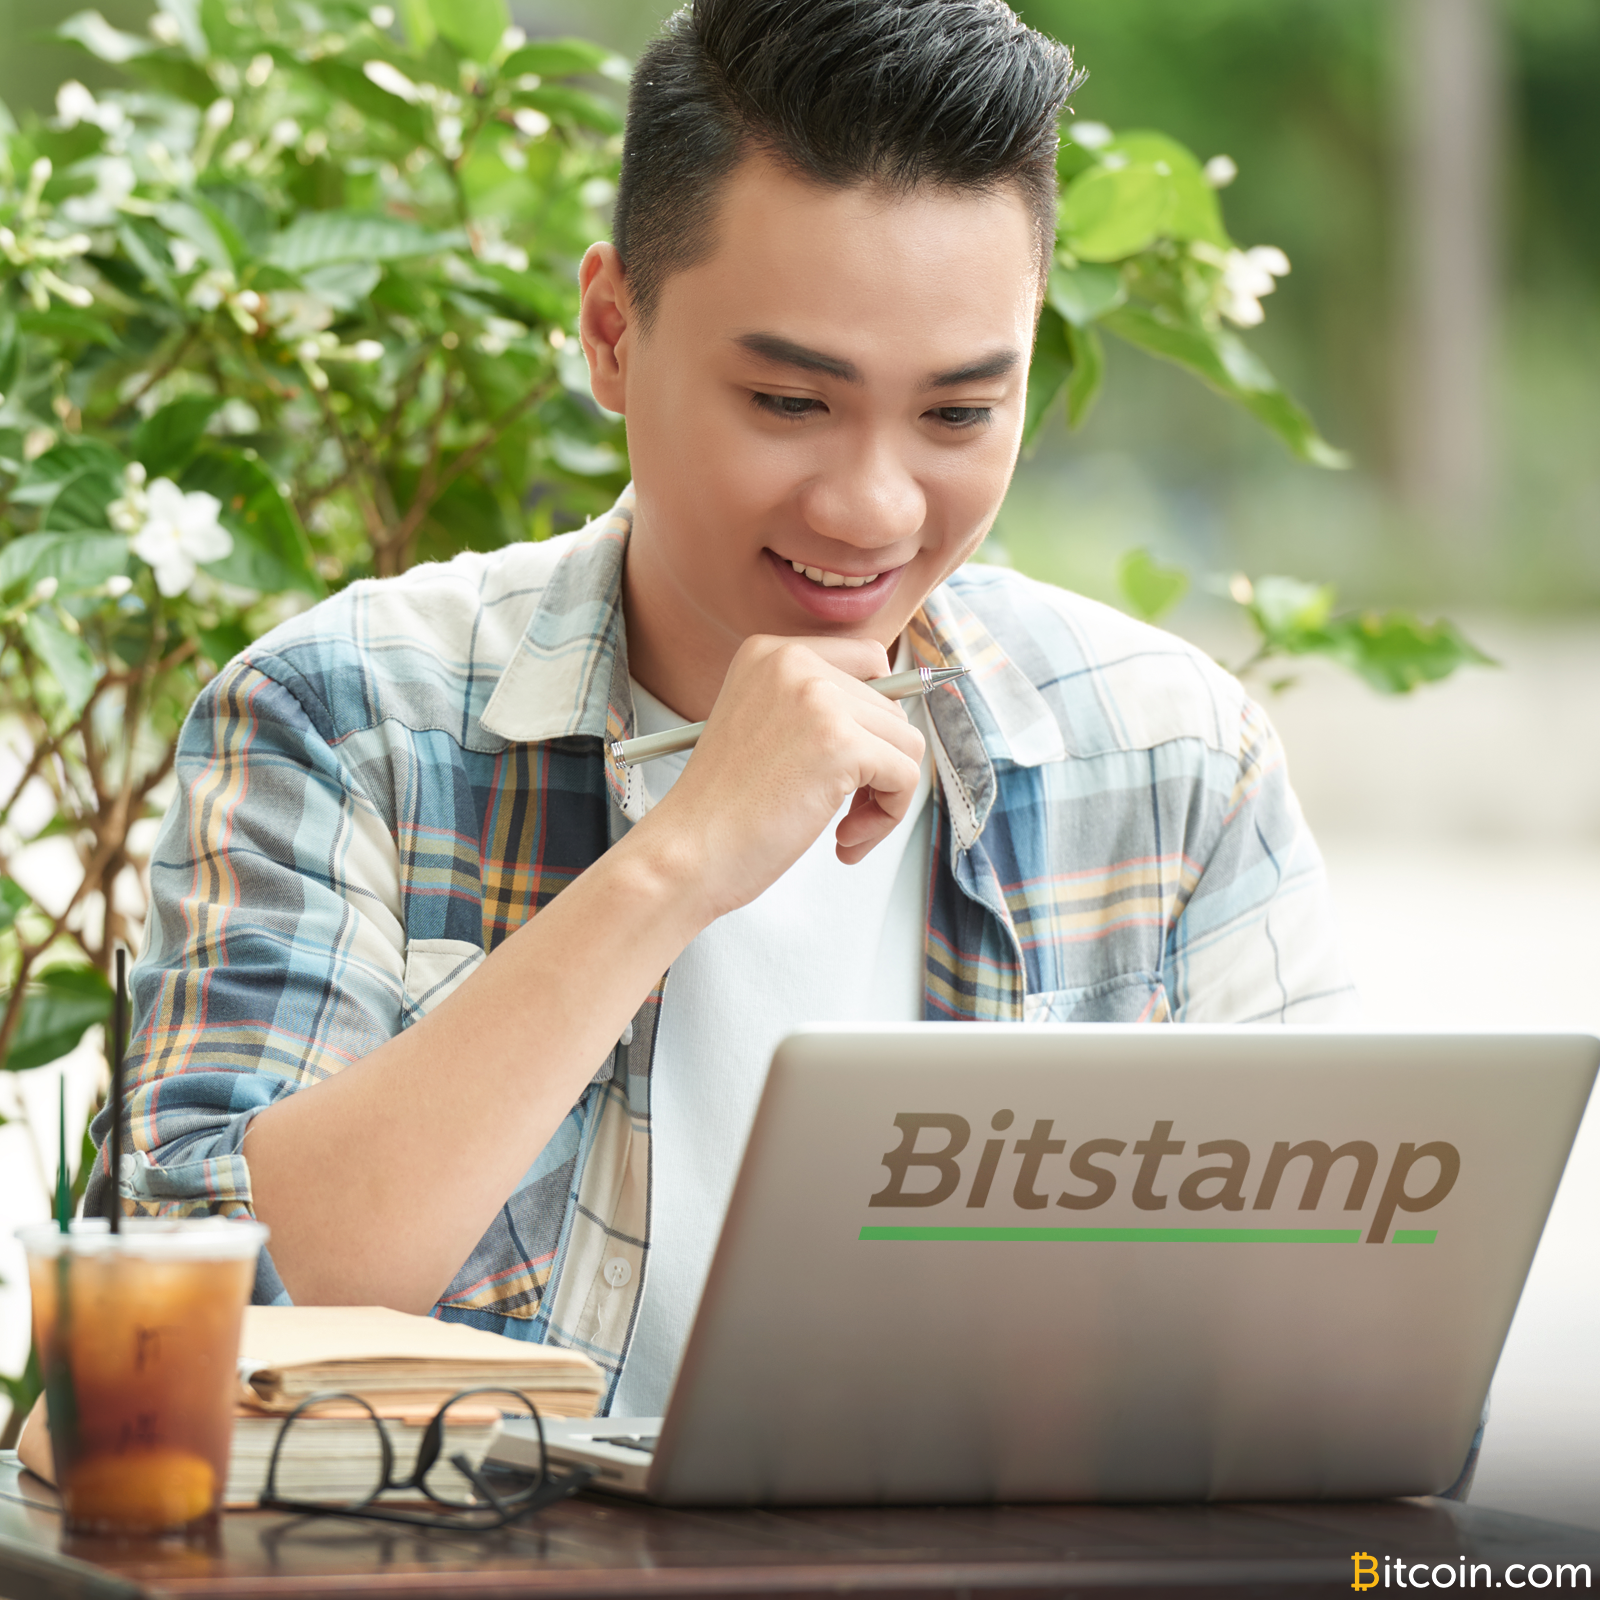 Bitstamp's Position Changes — Will Distribute Bitcoin Cash to Customers